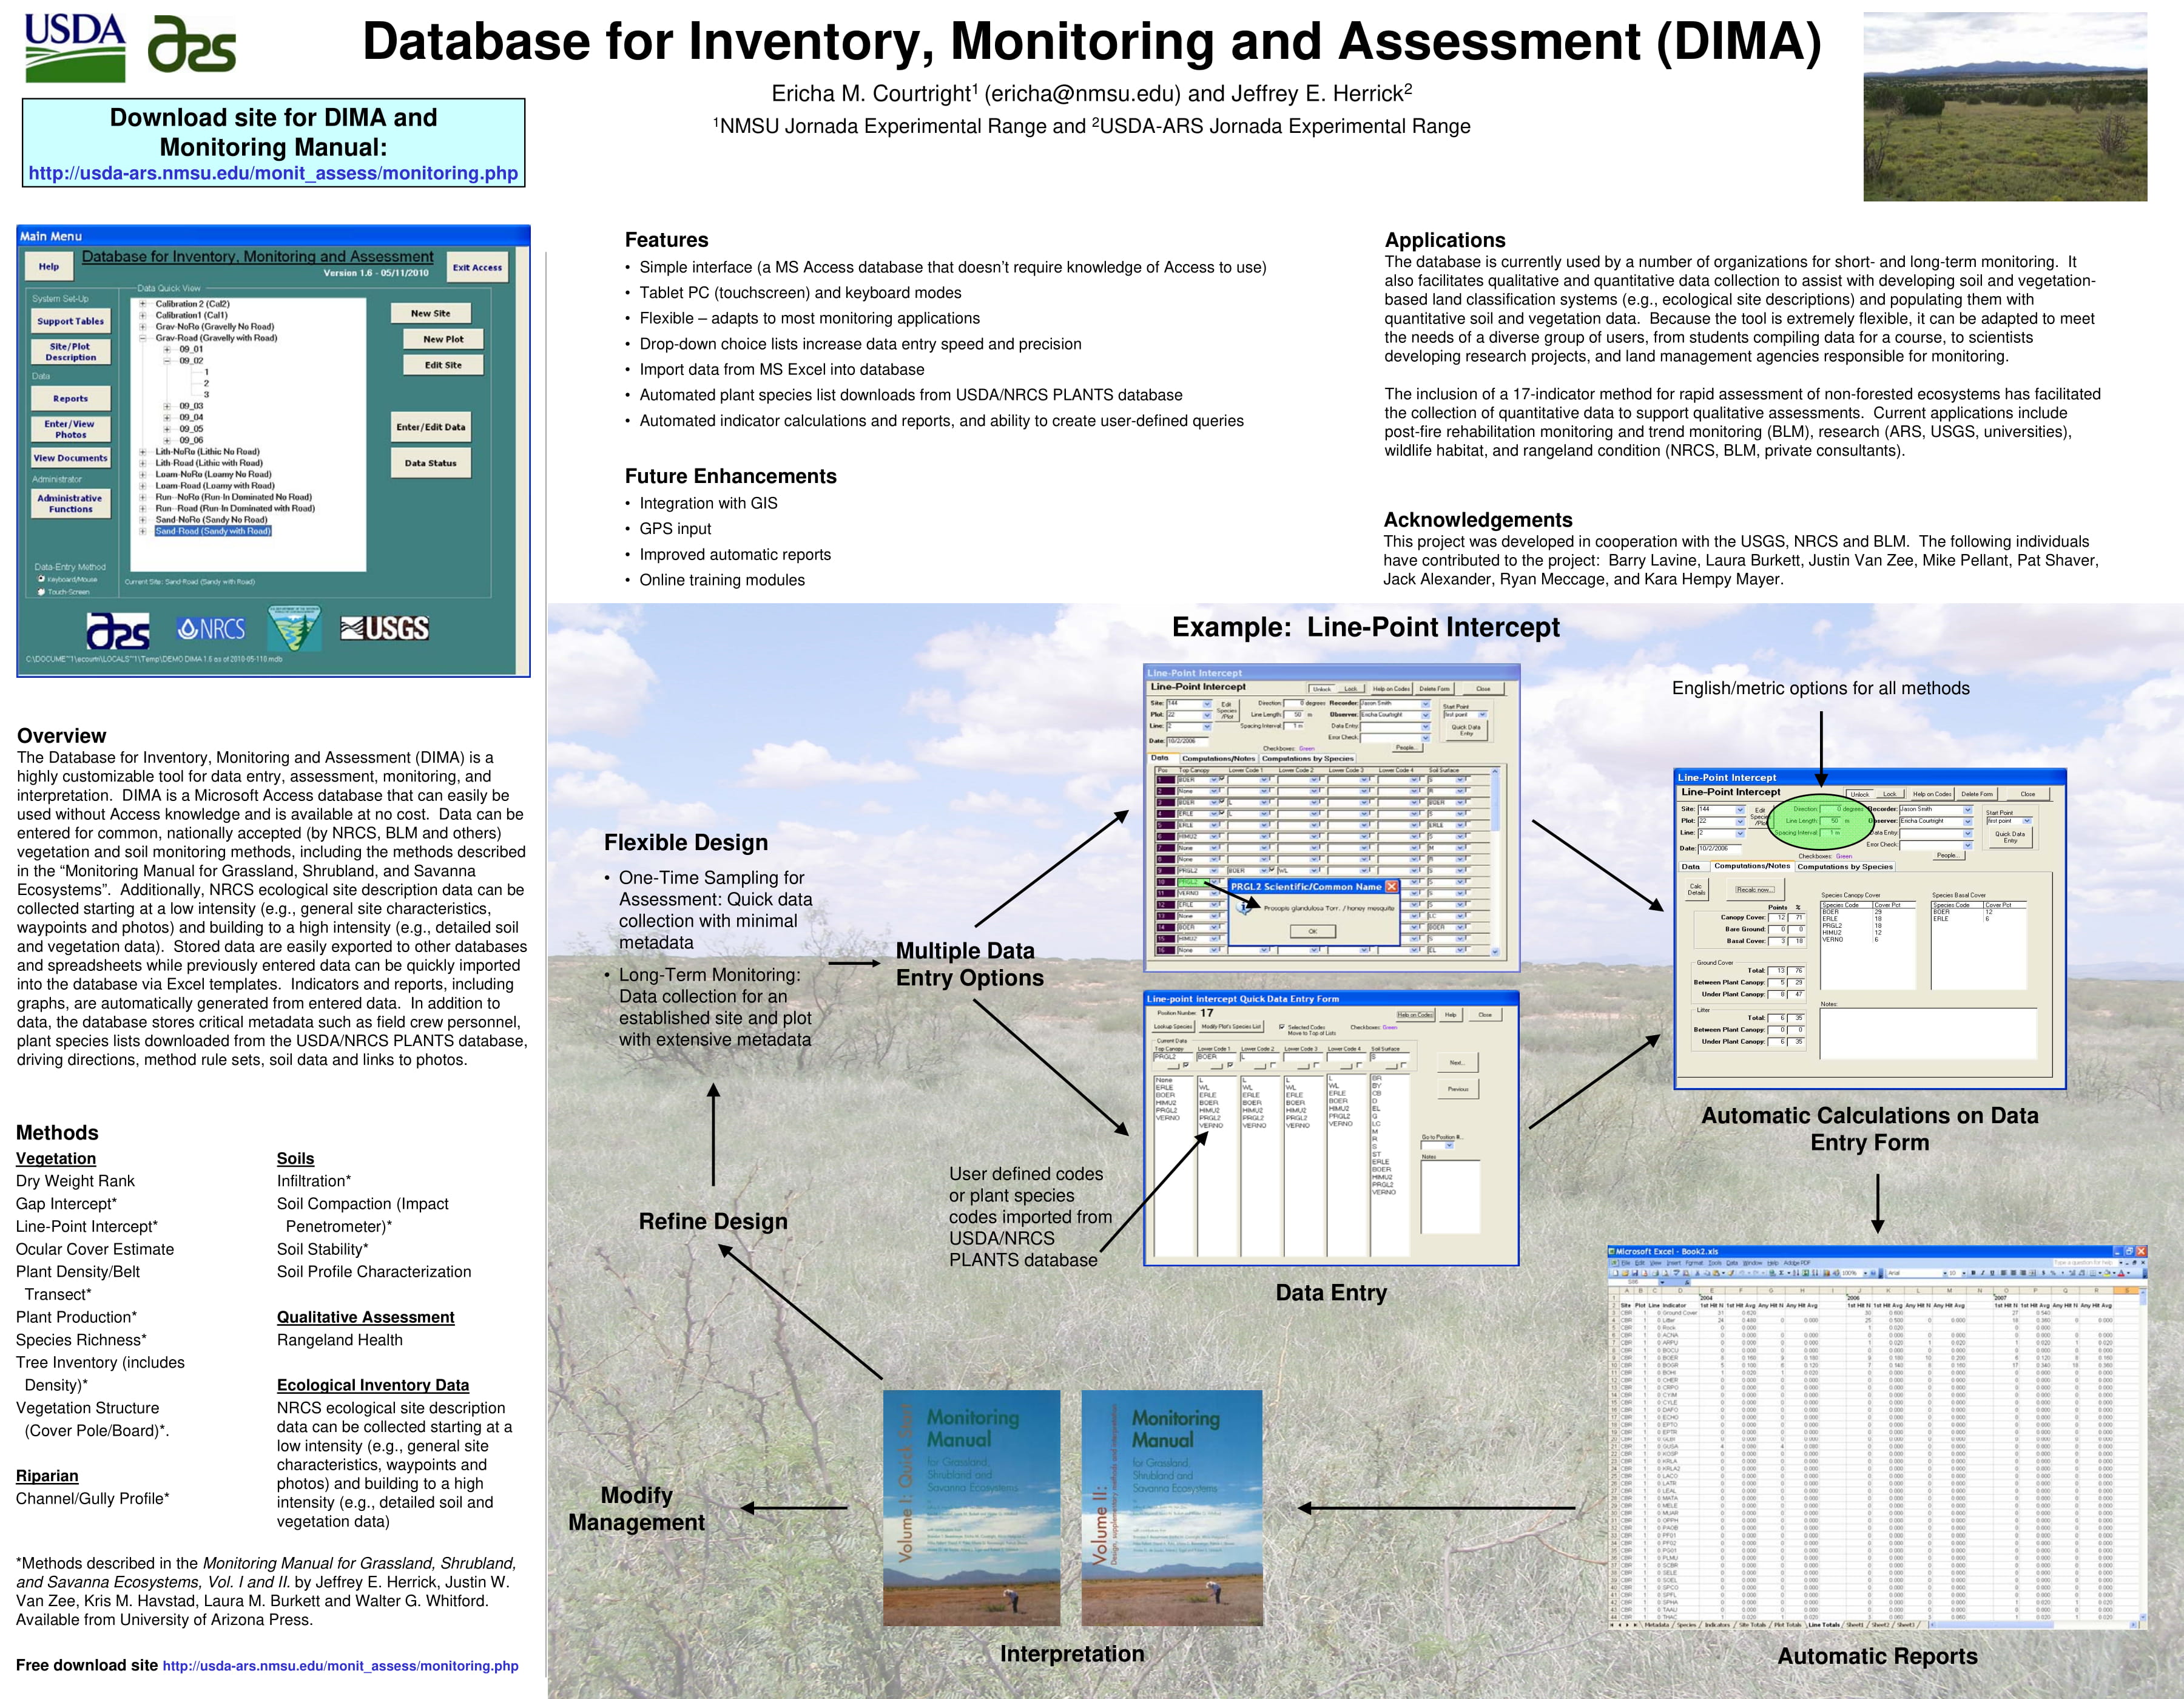 Database for Inventory Monitoring and Assessment Example 1